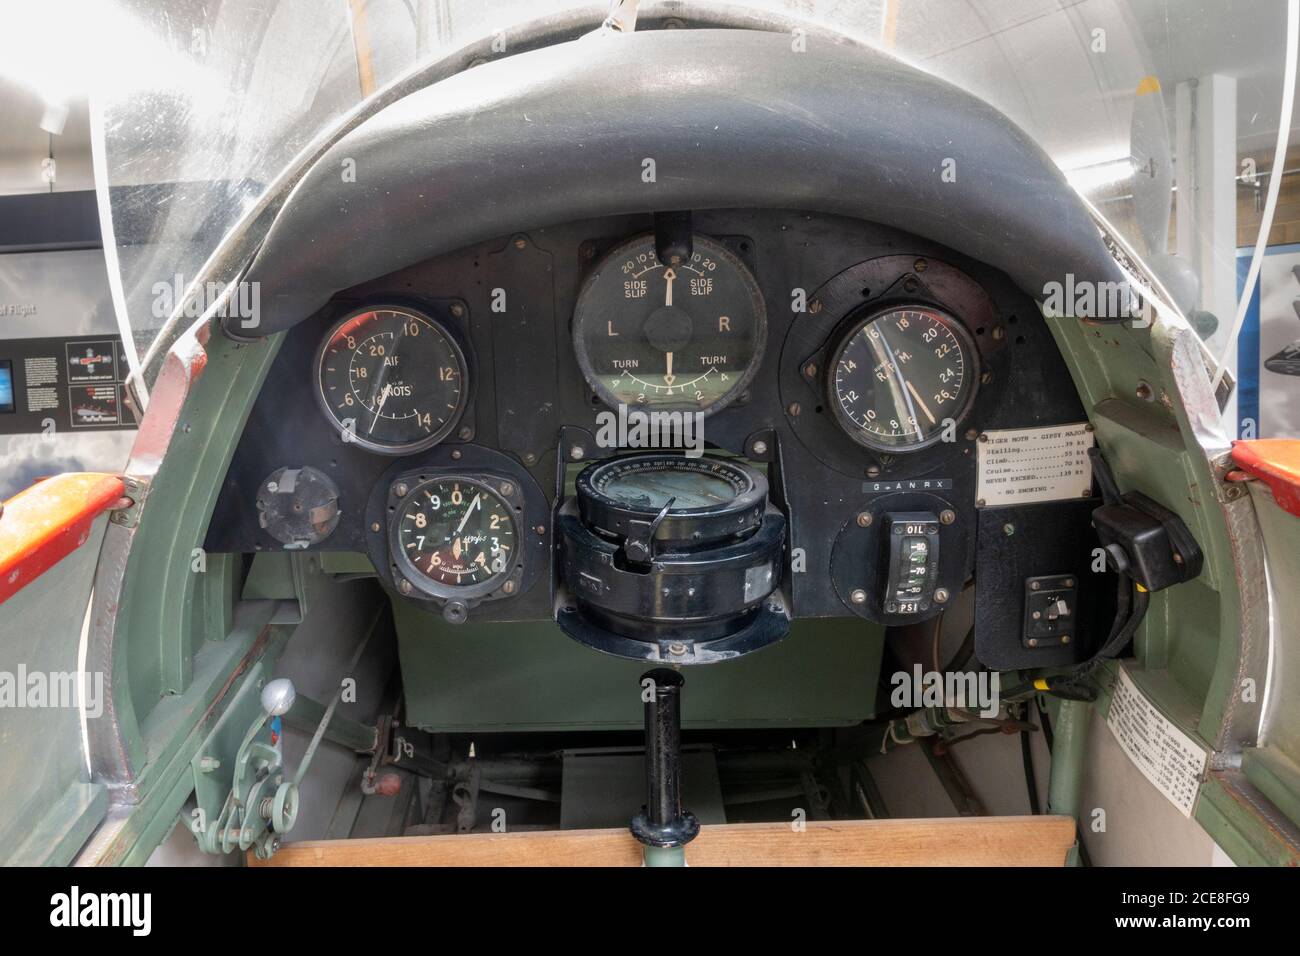 View inside the cockpit of a De Havilland DH 82A Tiger Moth on display in the De Havilland Museum, London Colney, UK. Stock Photo